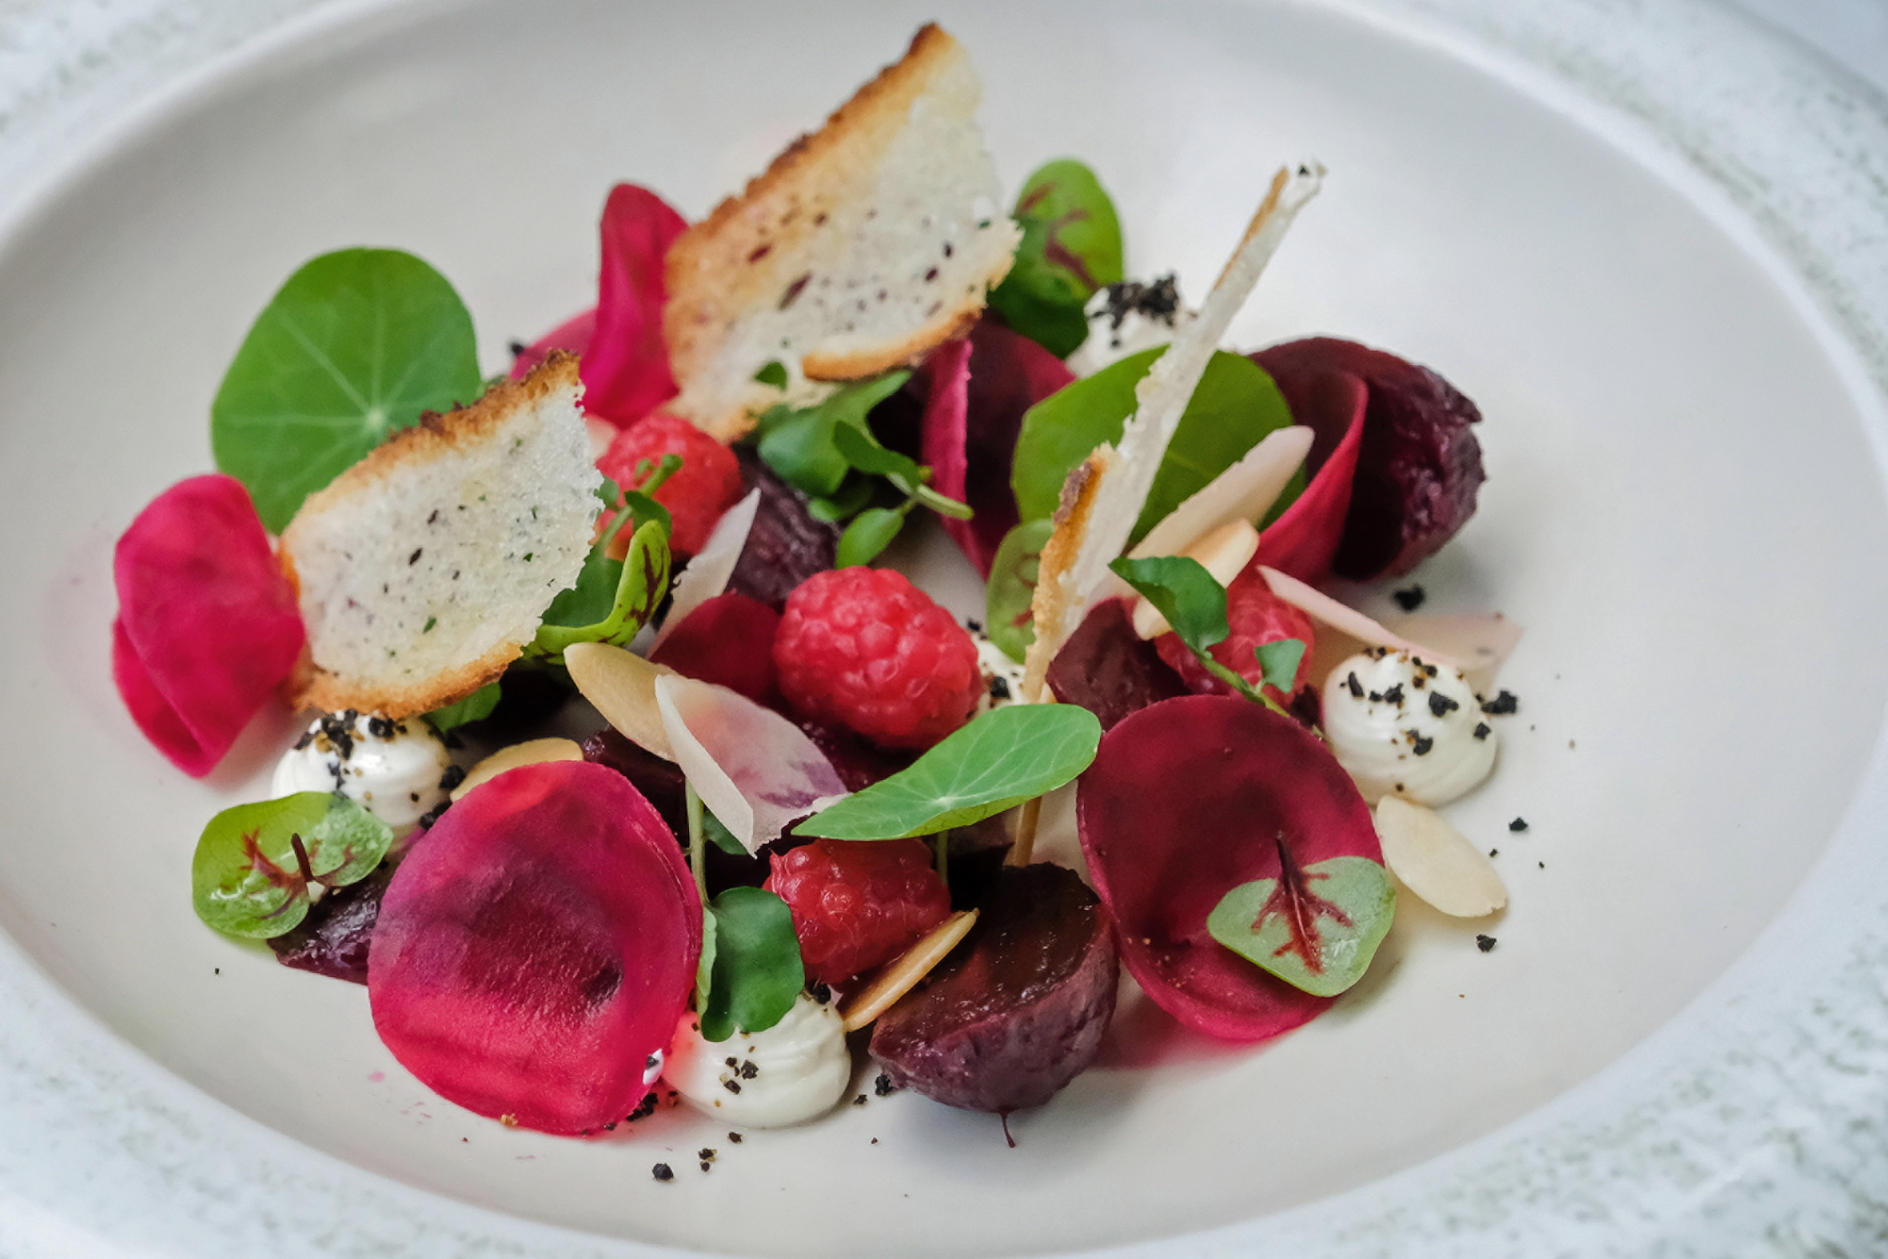 Beetroot and Goat’s Cheese Salad: The beetroot is presented two ways (roasted and pickled) with goat’s cheese puree, fresh sliced salak (local snakeskin fruit), whole raspberries, almond flakes and dehydrated ground olives.  Click to enlarge.